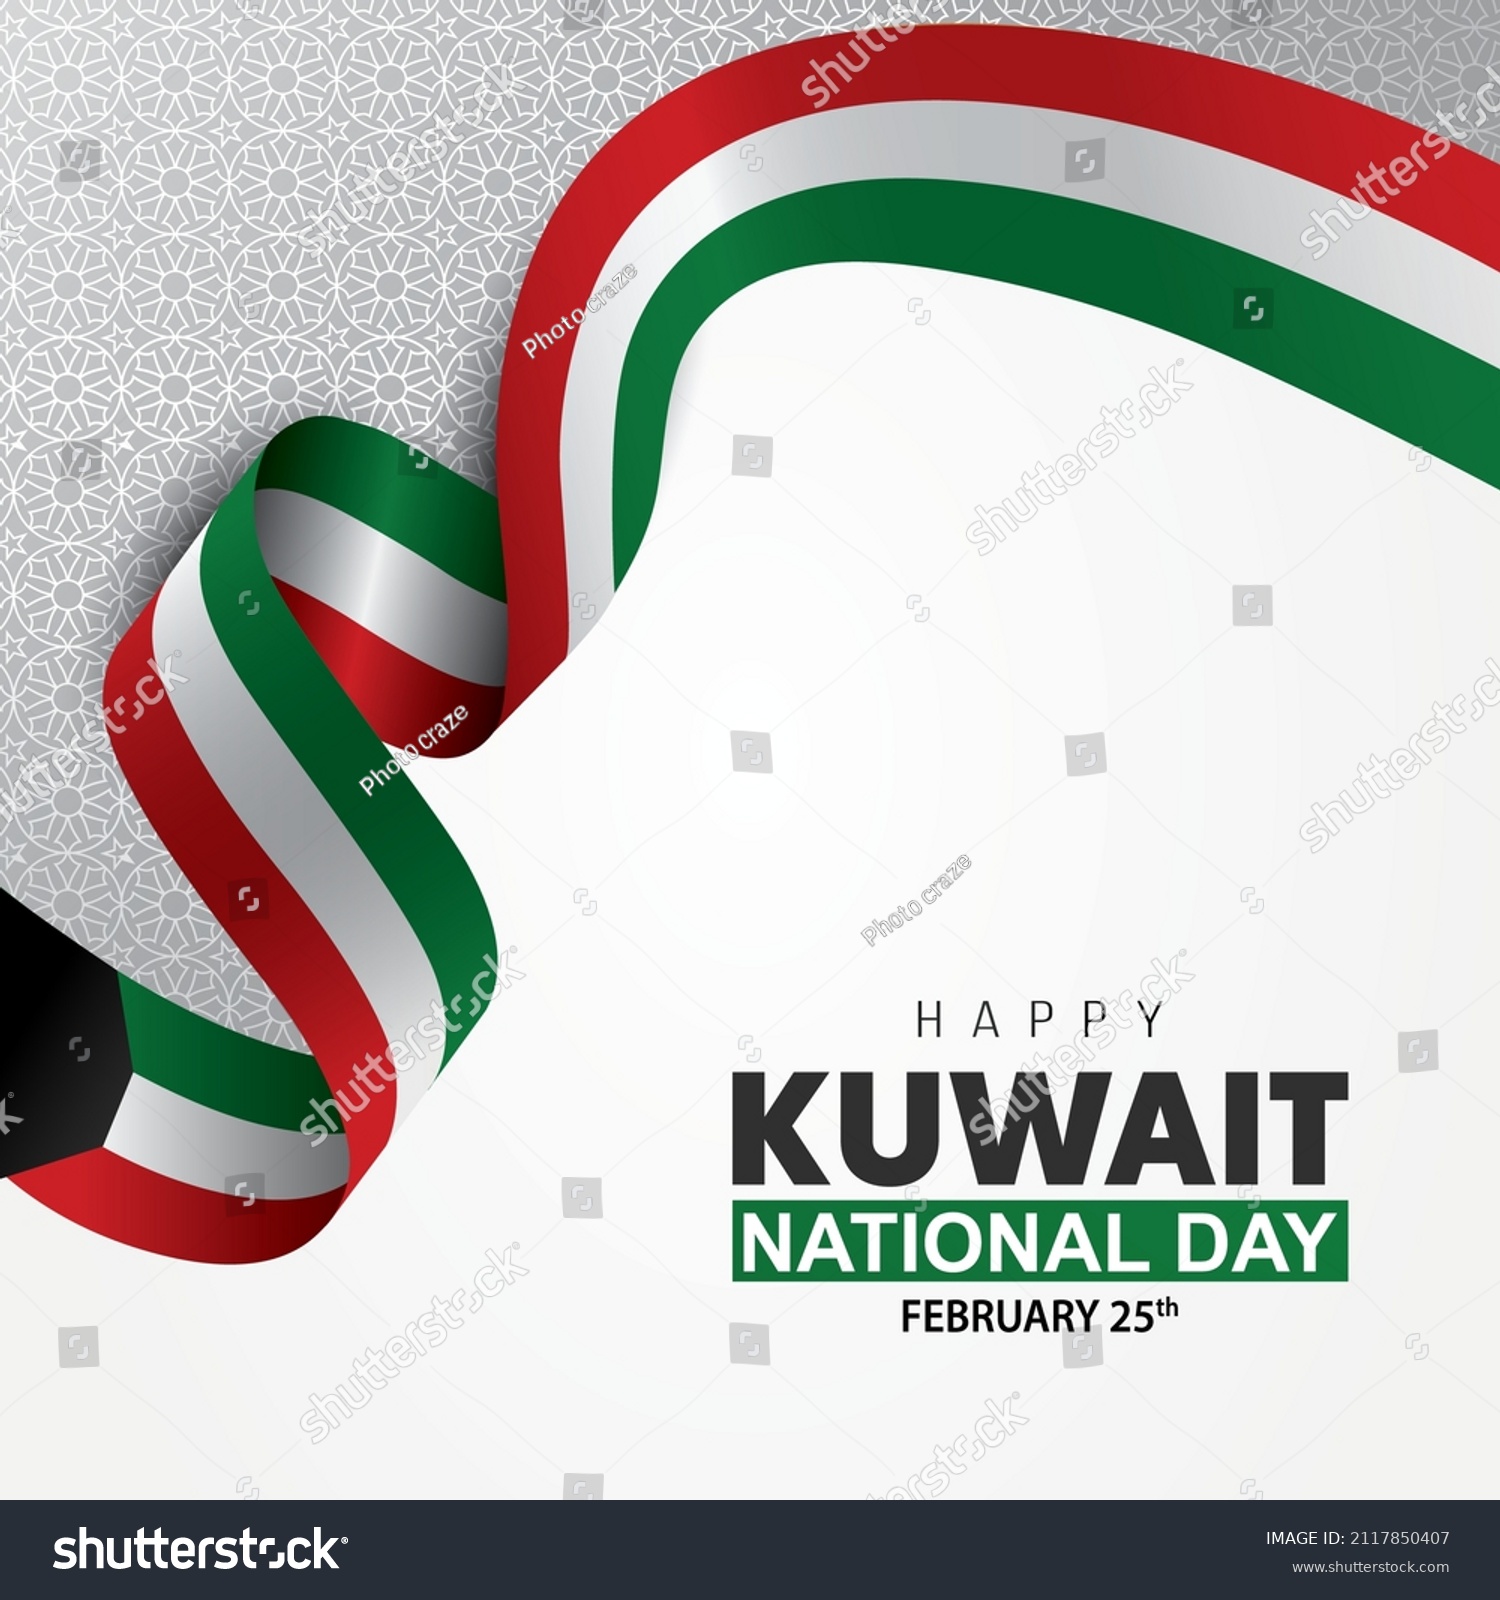 25th February Happy National Day Kuwait Stock Vector (Royalty Free ...